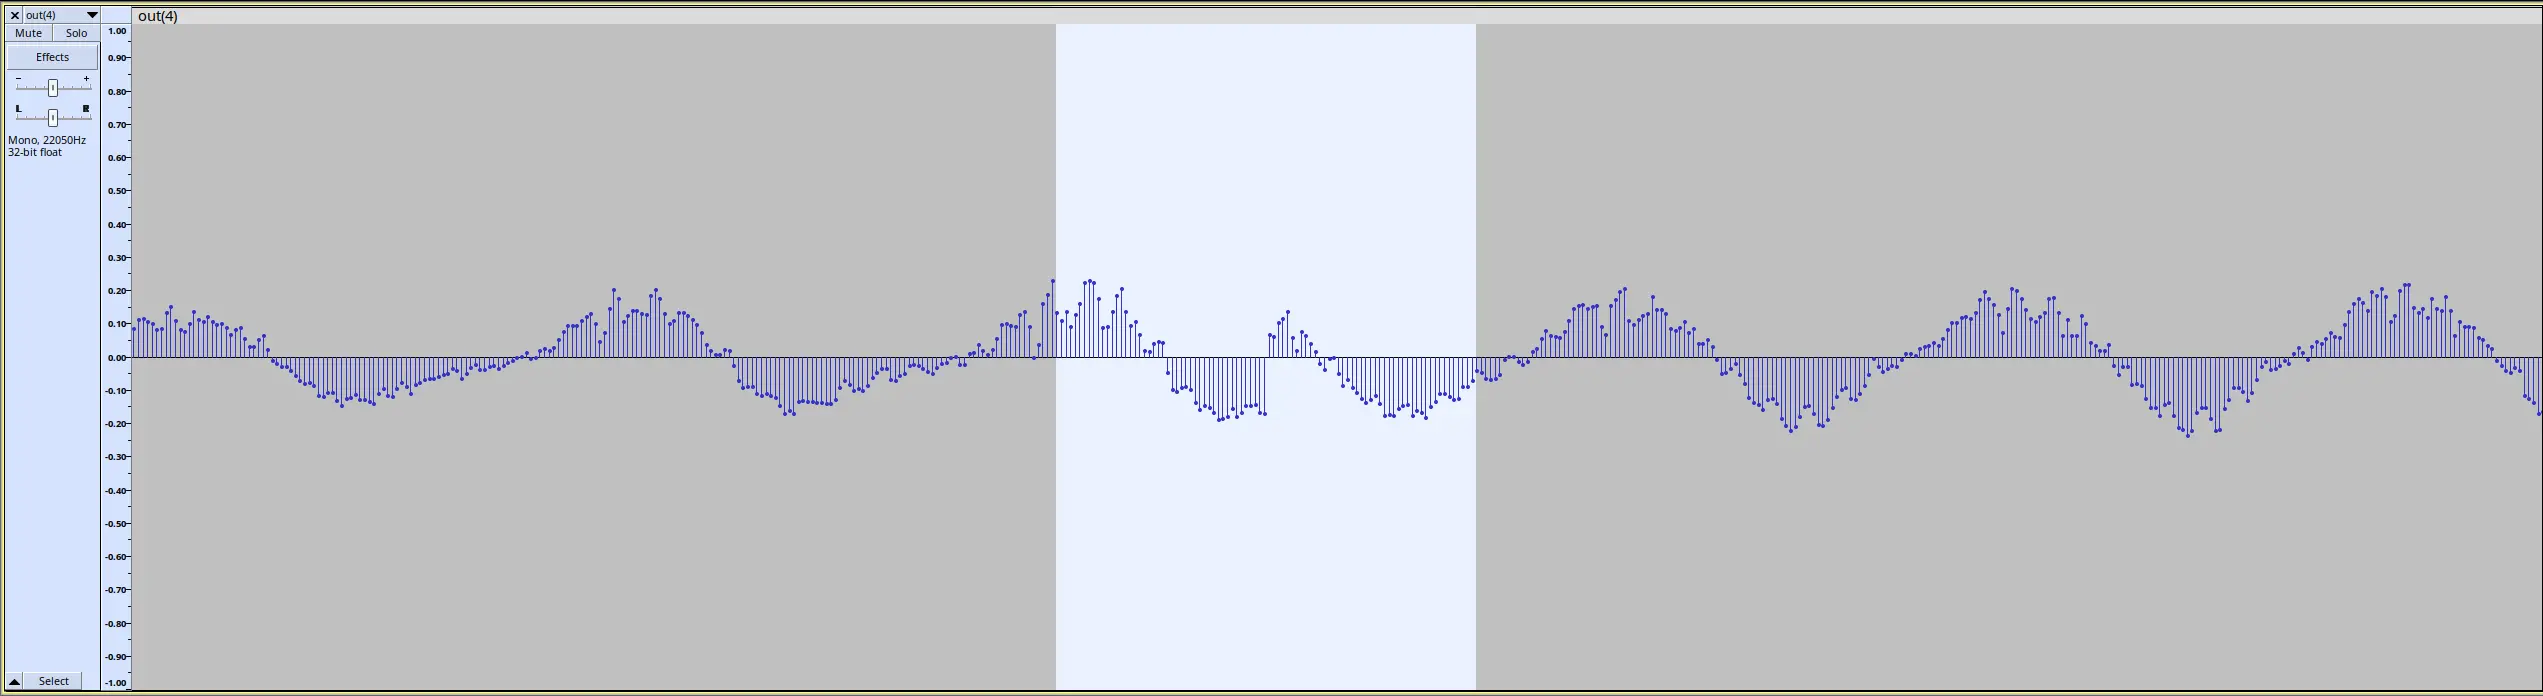 Audacity view of the cracking sound, it is easy to see the sudden jumps in the sample